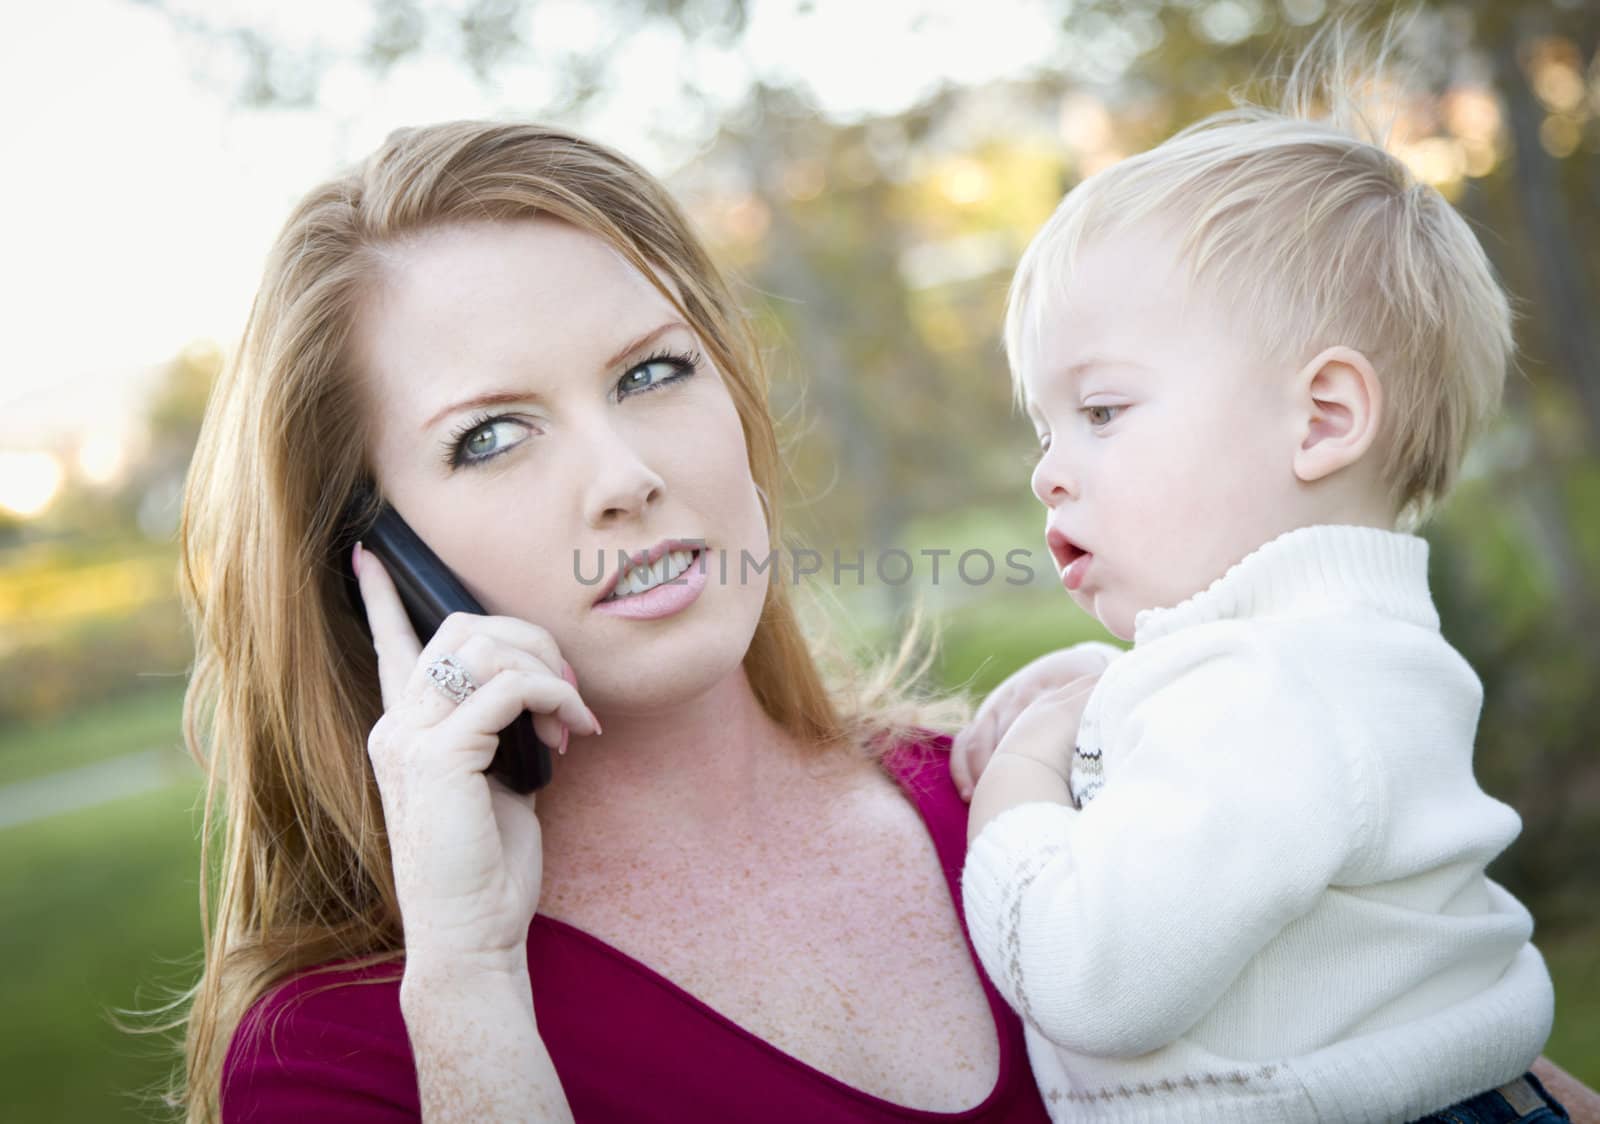 Attractive Woman Using Cell Phone with Child by Feverpitched